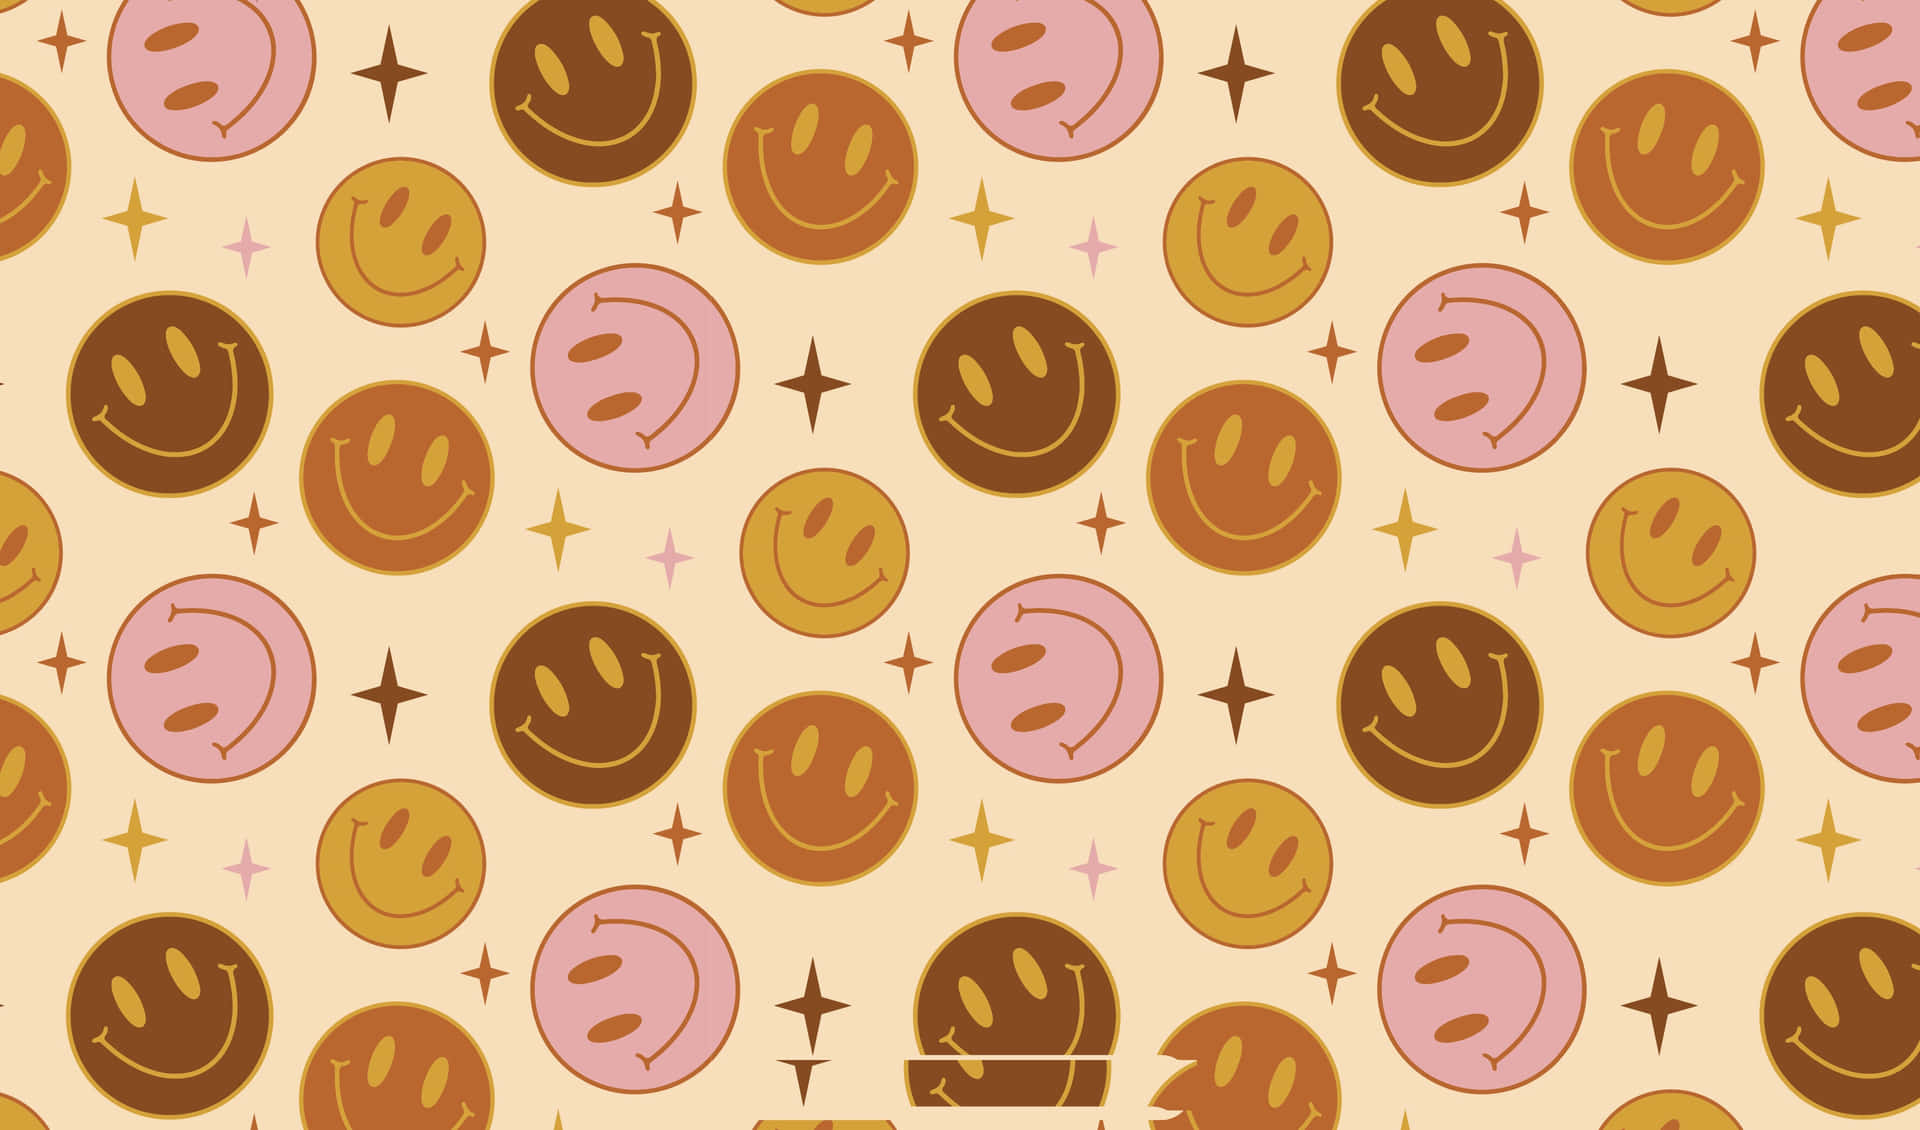 Preppy Smiley Face Background Wallpaper